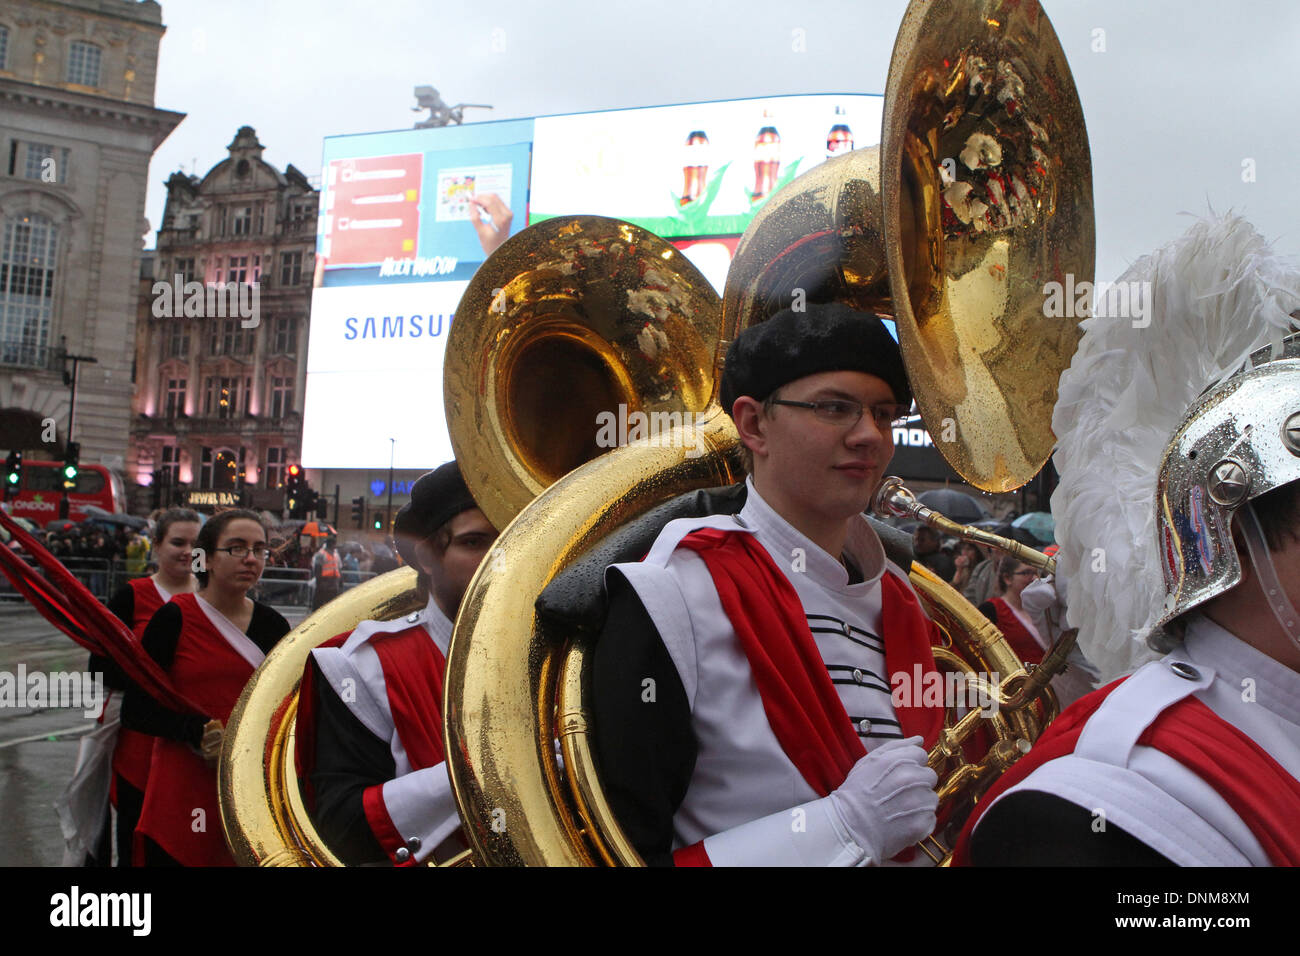 London,UK,1er janvier 2014,Troy Troie High School marching band à la London's New Year's Day Parade 2014 Credit : Keith Larby/Alamy Live News Banque D'Images